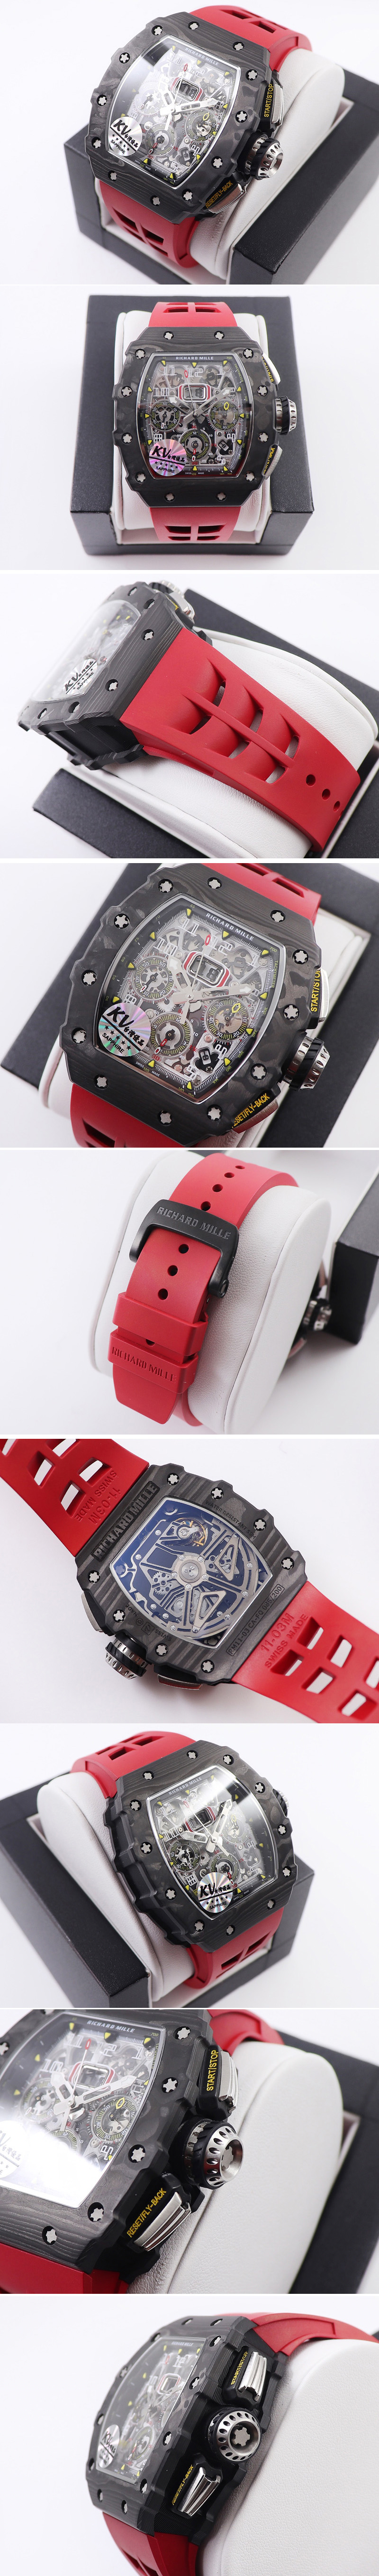 Replica Richard Mille RM011 NTPT Chrono KVF 1:1 Best Edition Crystal Dial on Red Rubber Strap A7750 V2